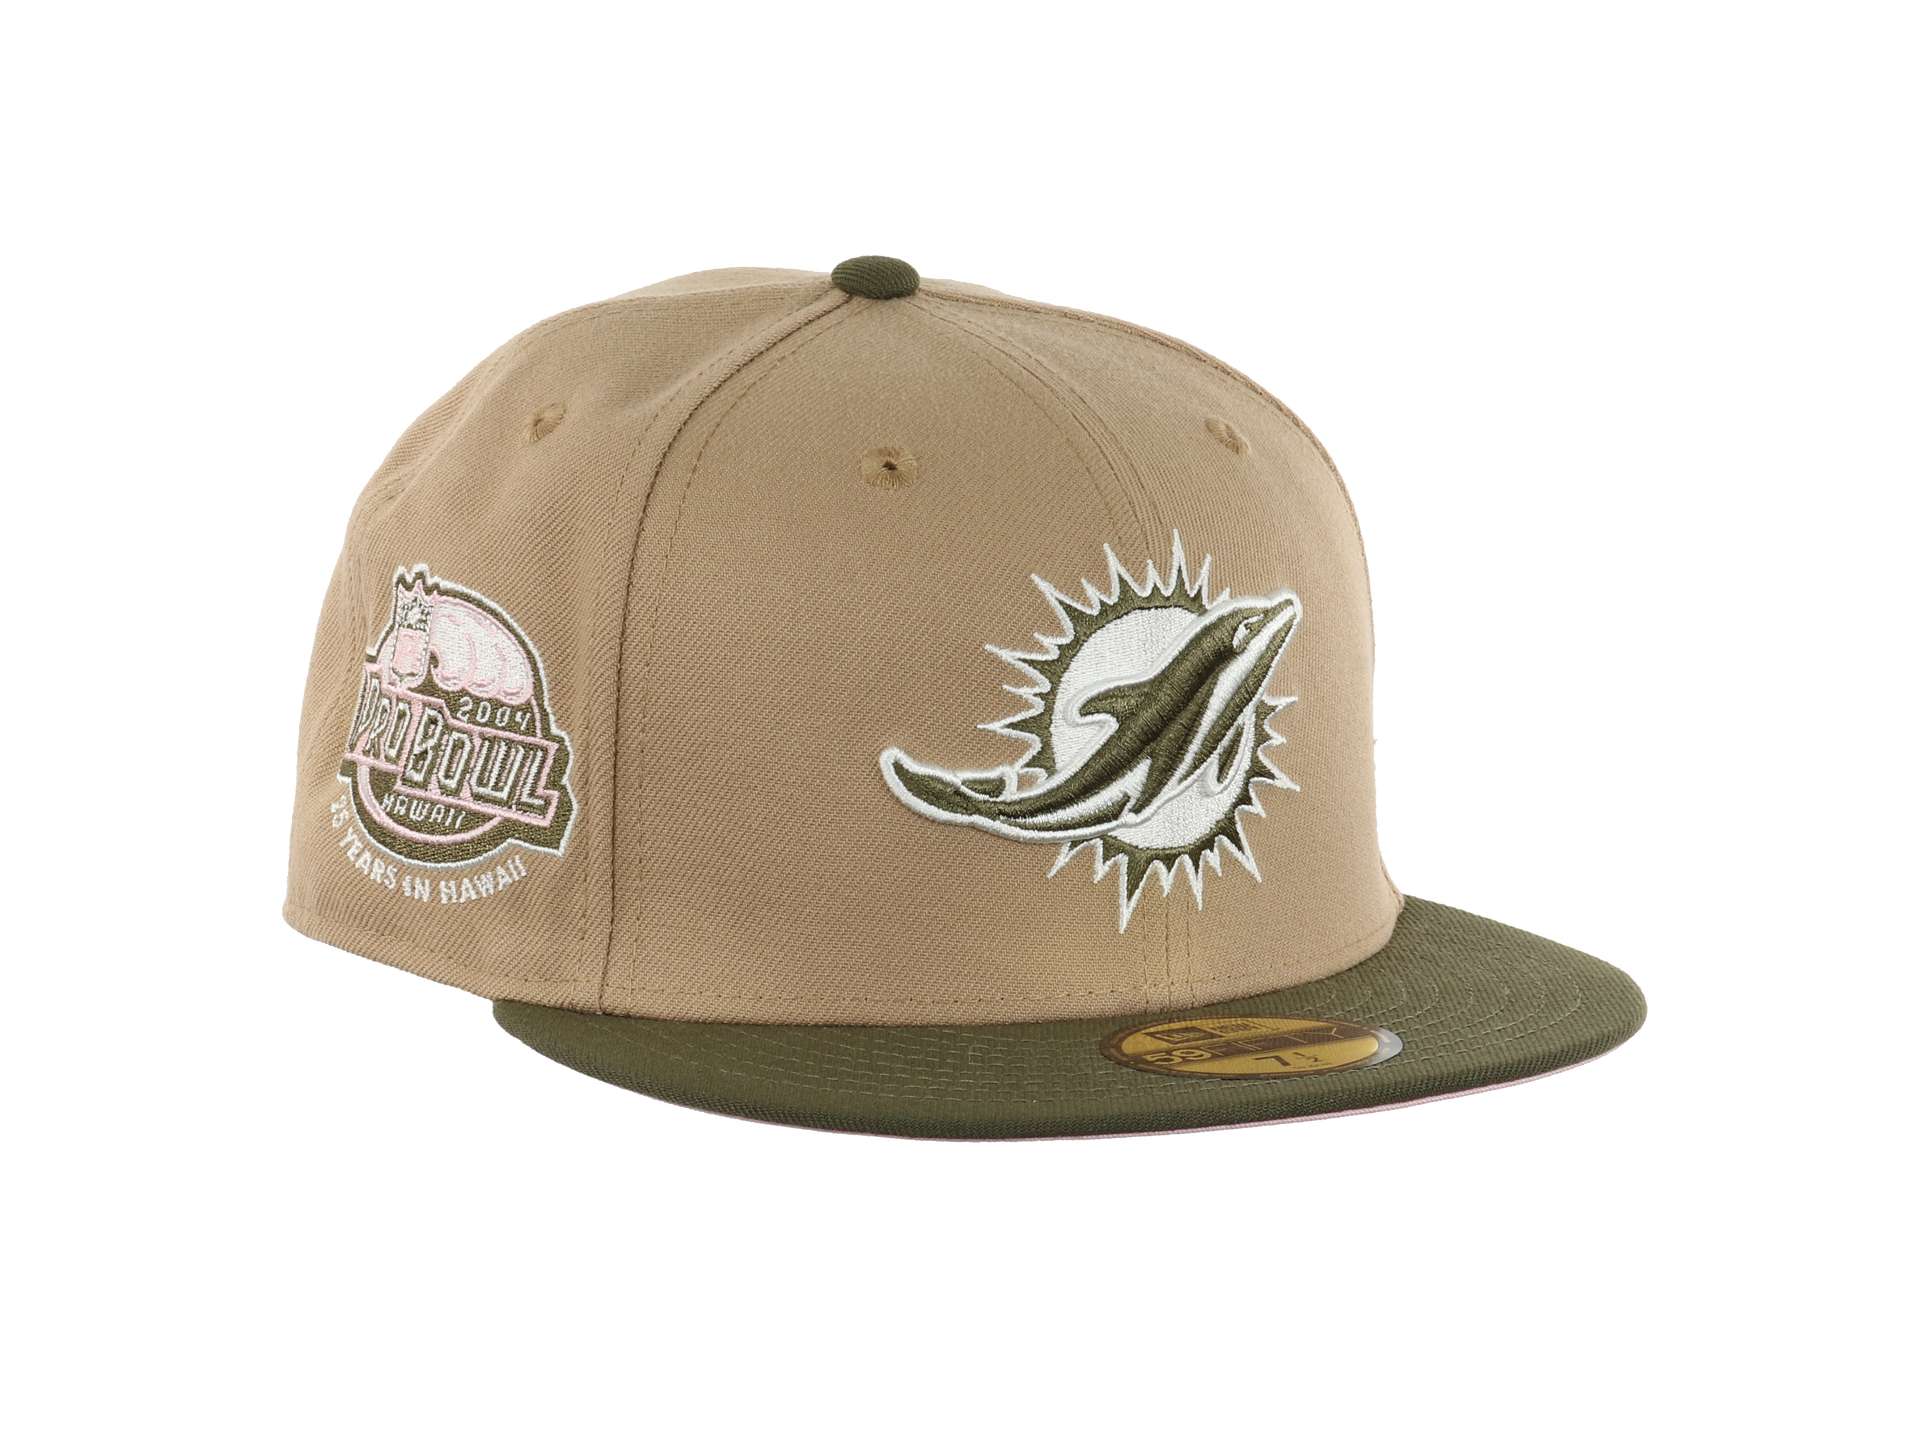 Miami Dolphins NFL Pro Bowl Hawaii 2004 Sidepatch Camel Olive 59Fifty Basecap New Era